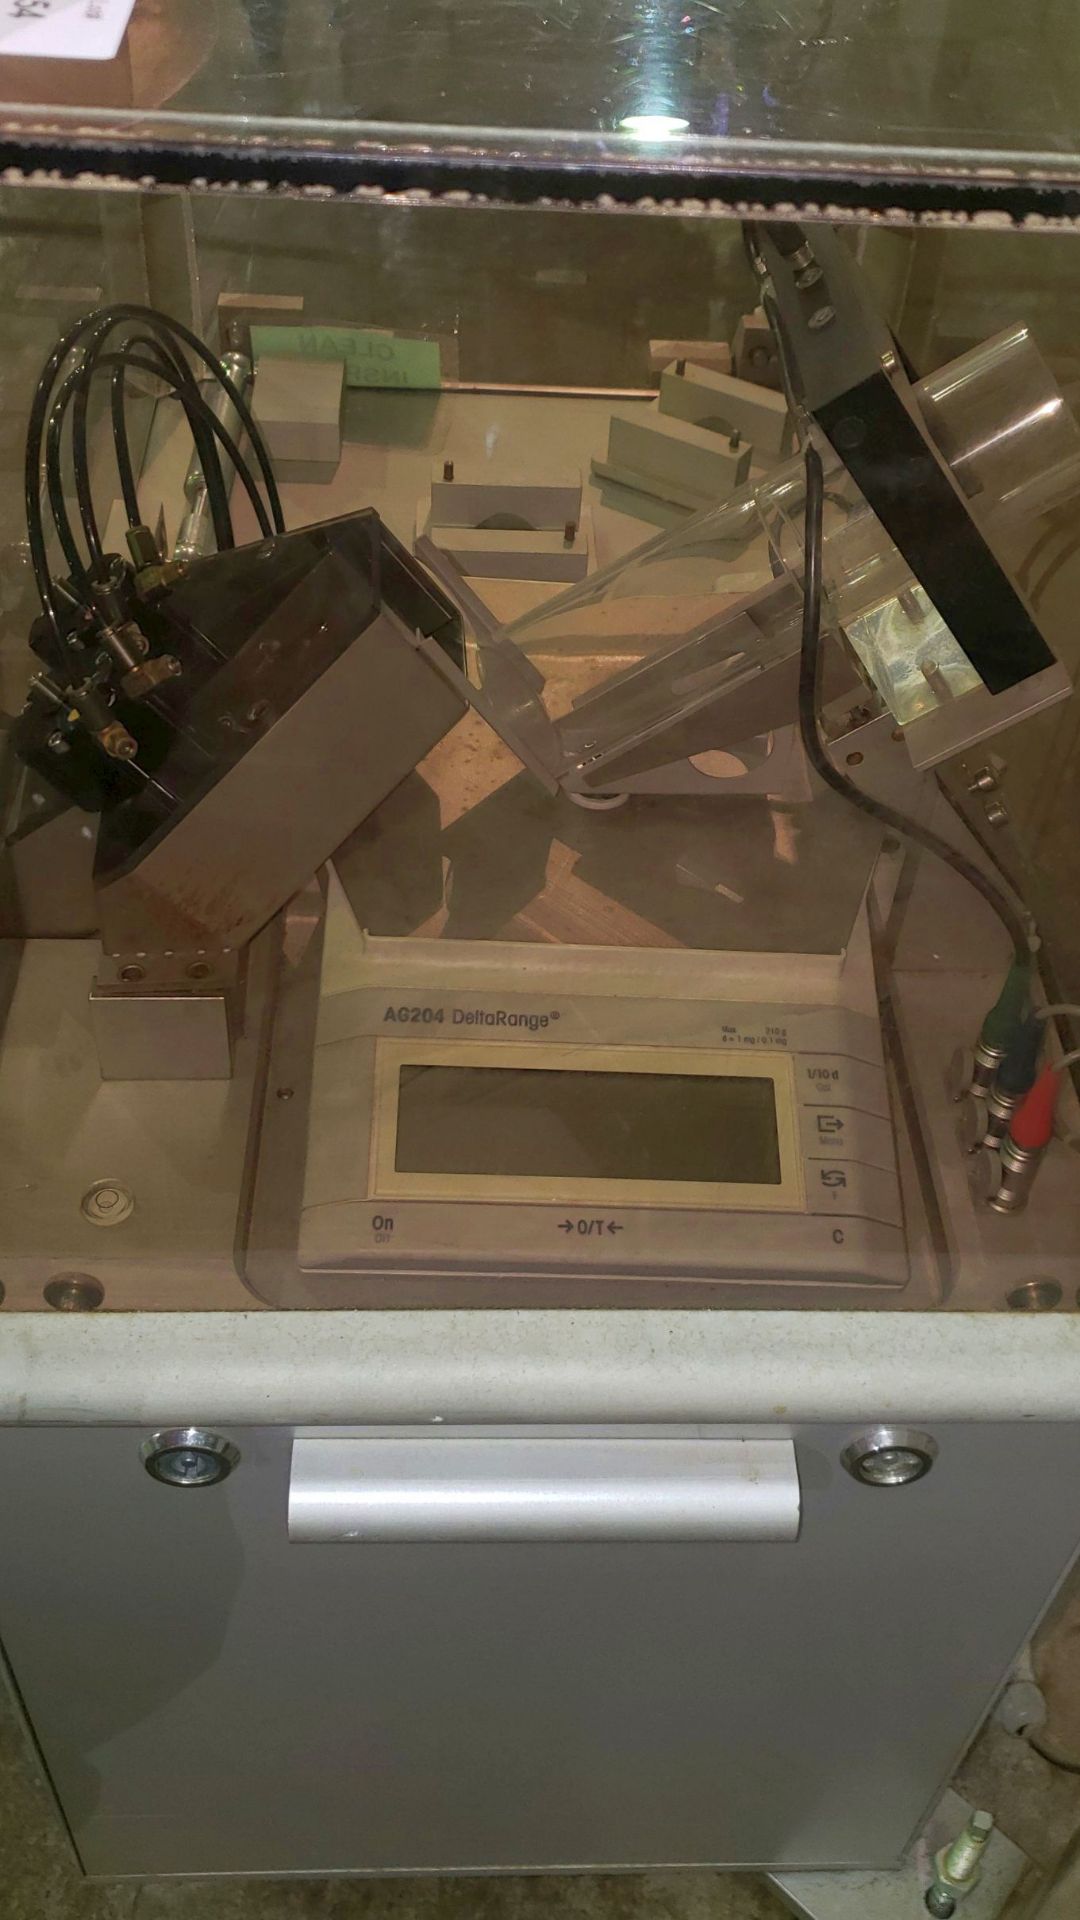 One (1) Korsch Pharma Check 1 monitoring and control device, type WK1A/046, with belt feeder, - Image 5 of 6